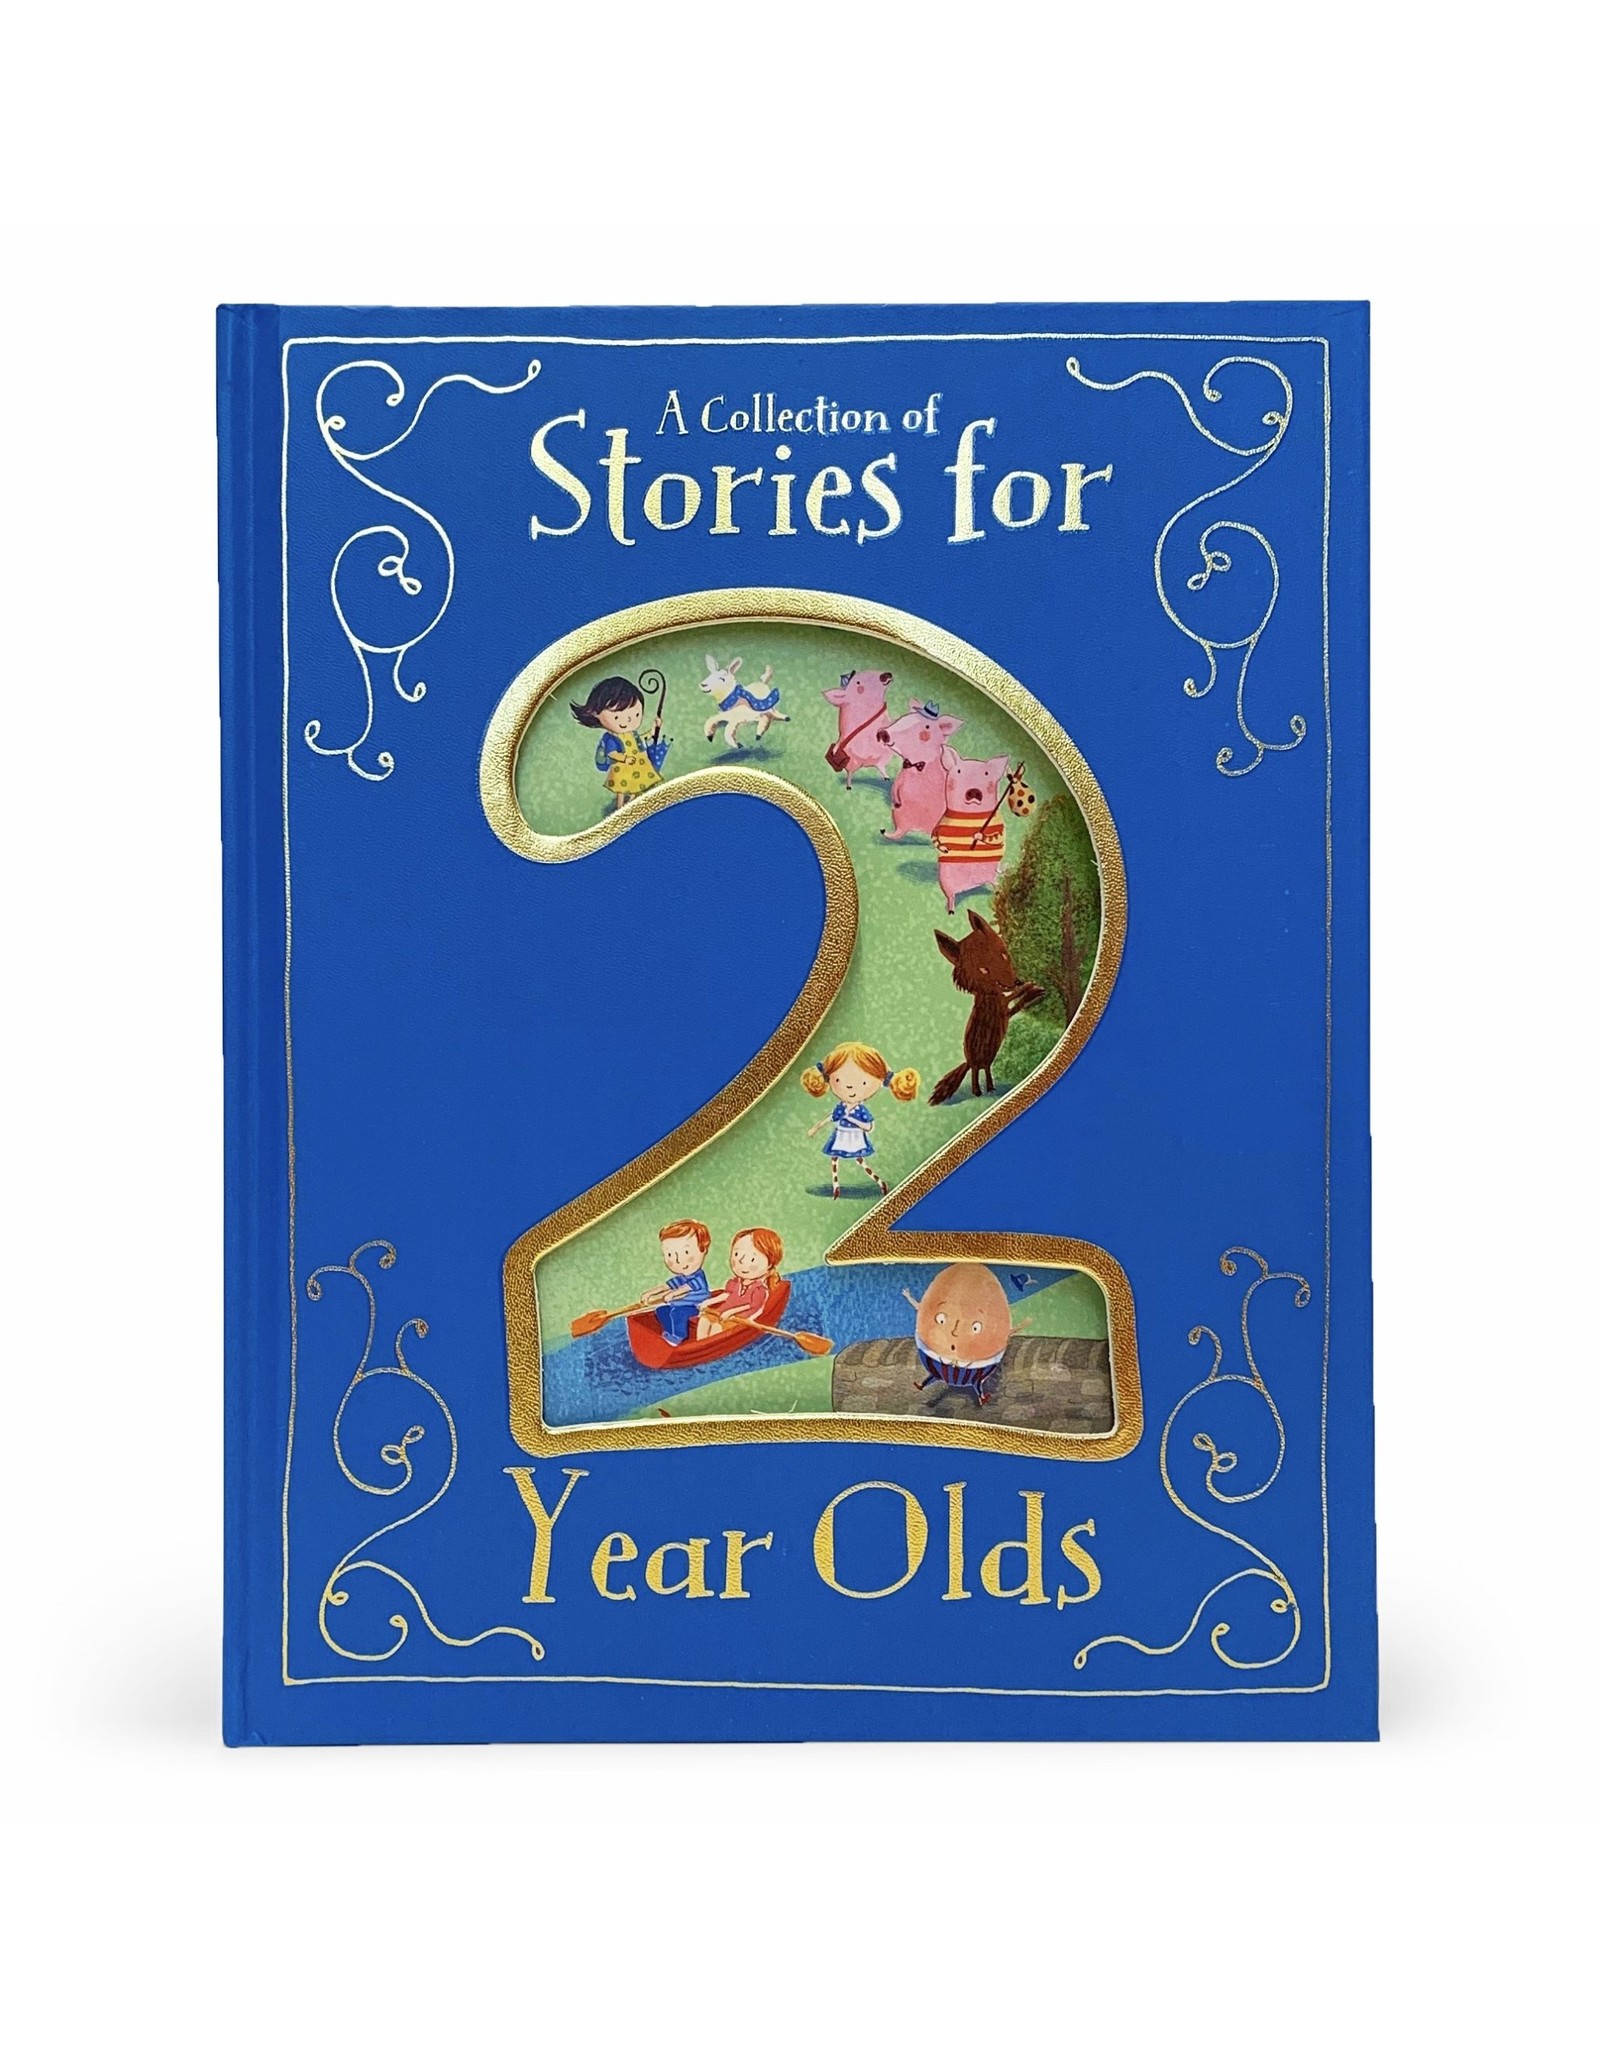 Stories for 2-Year-Olds